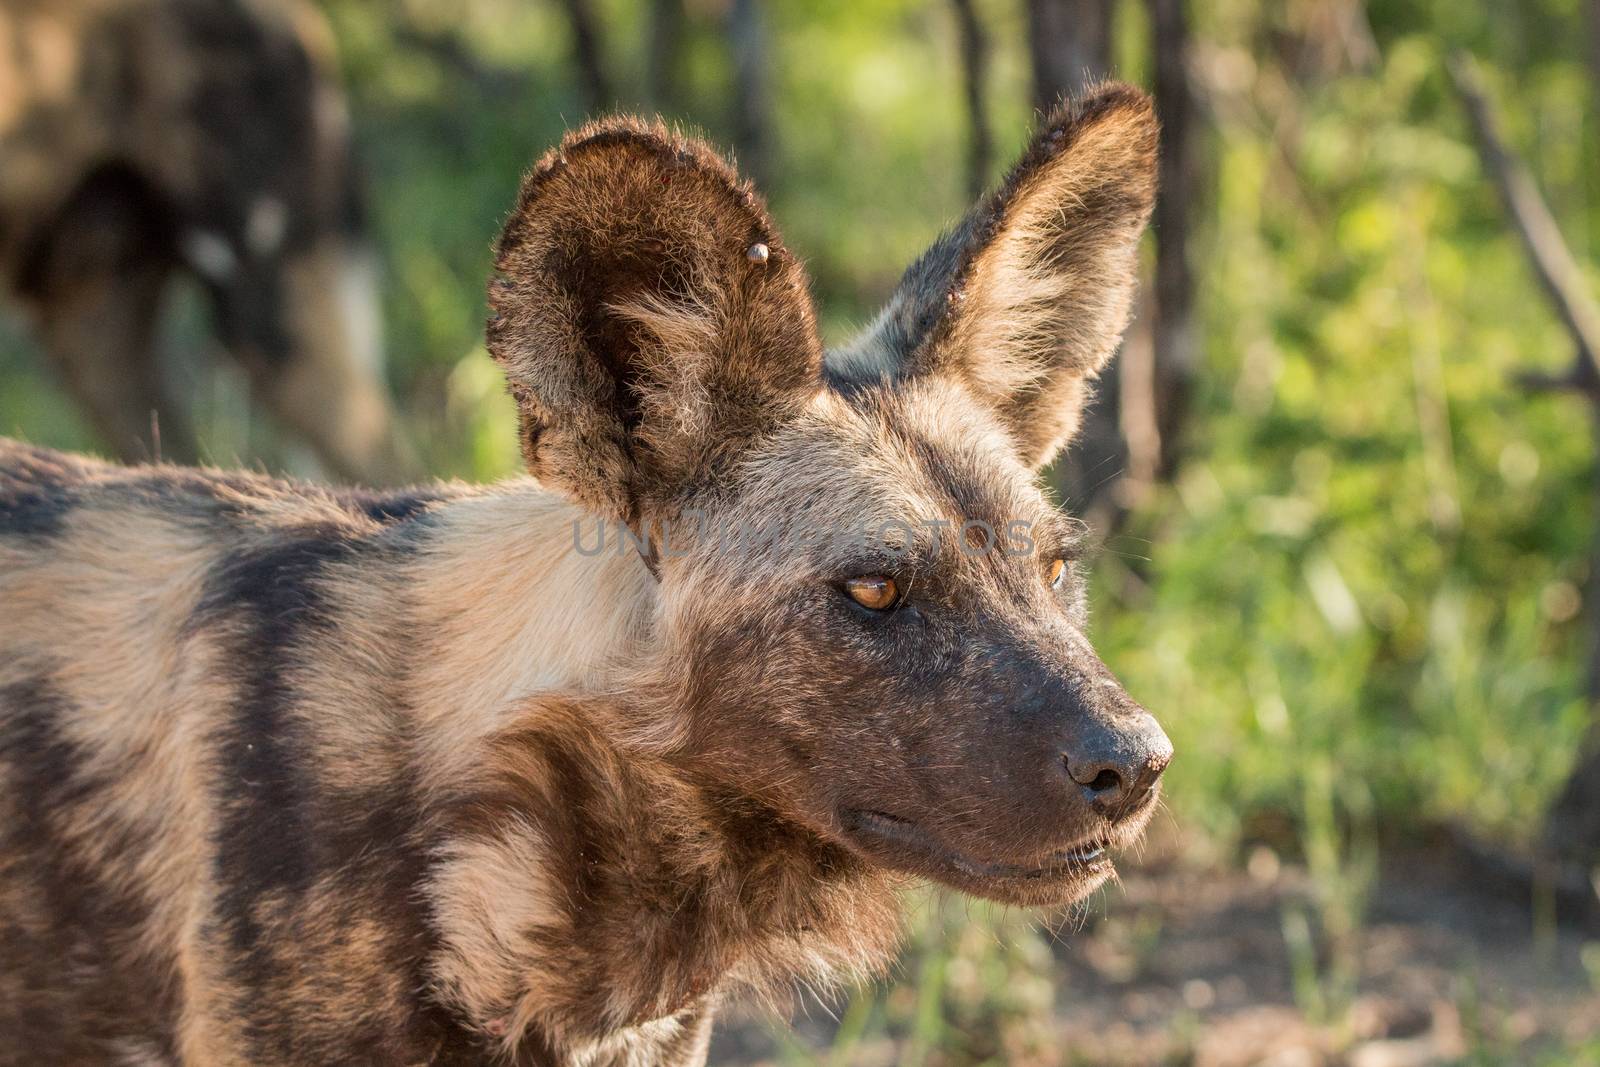 Starring African wild dog in the Kruger National Park by Simoneemanphotography